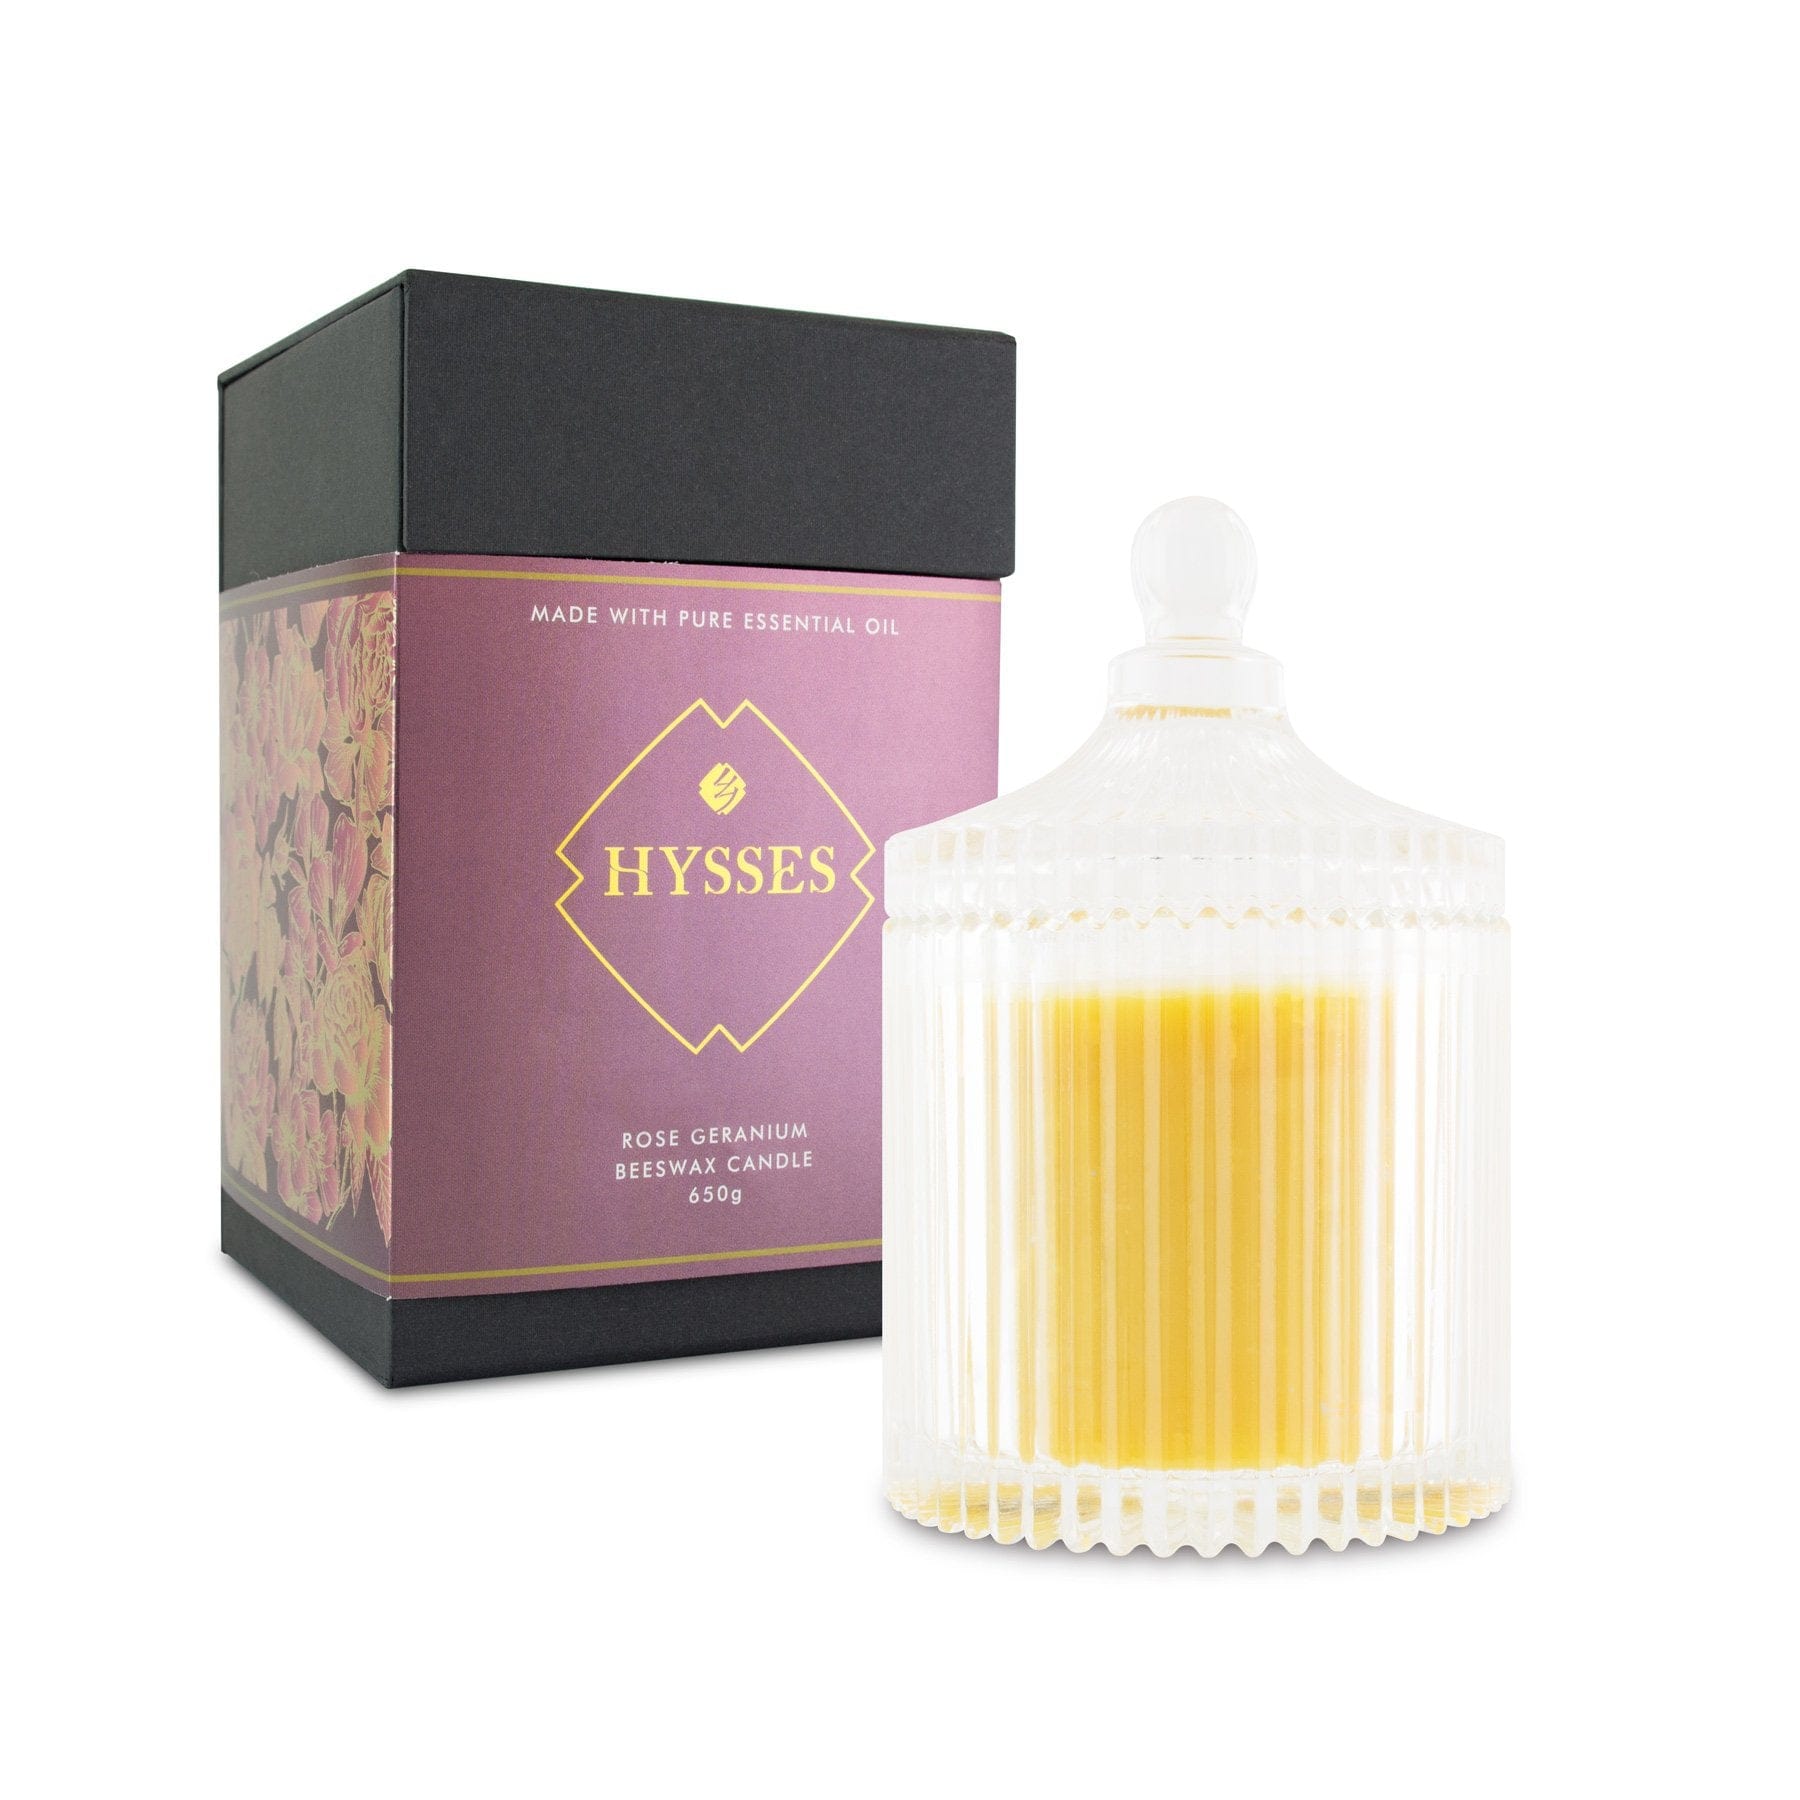 Hysses Home Scents 650g Beeswax Candle Rose Geranium, 650g